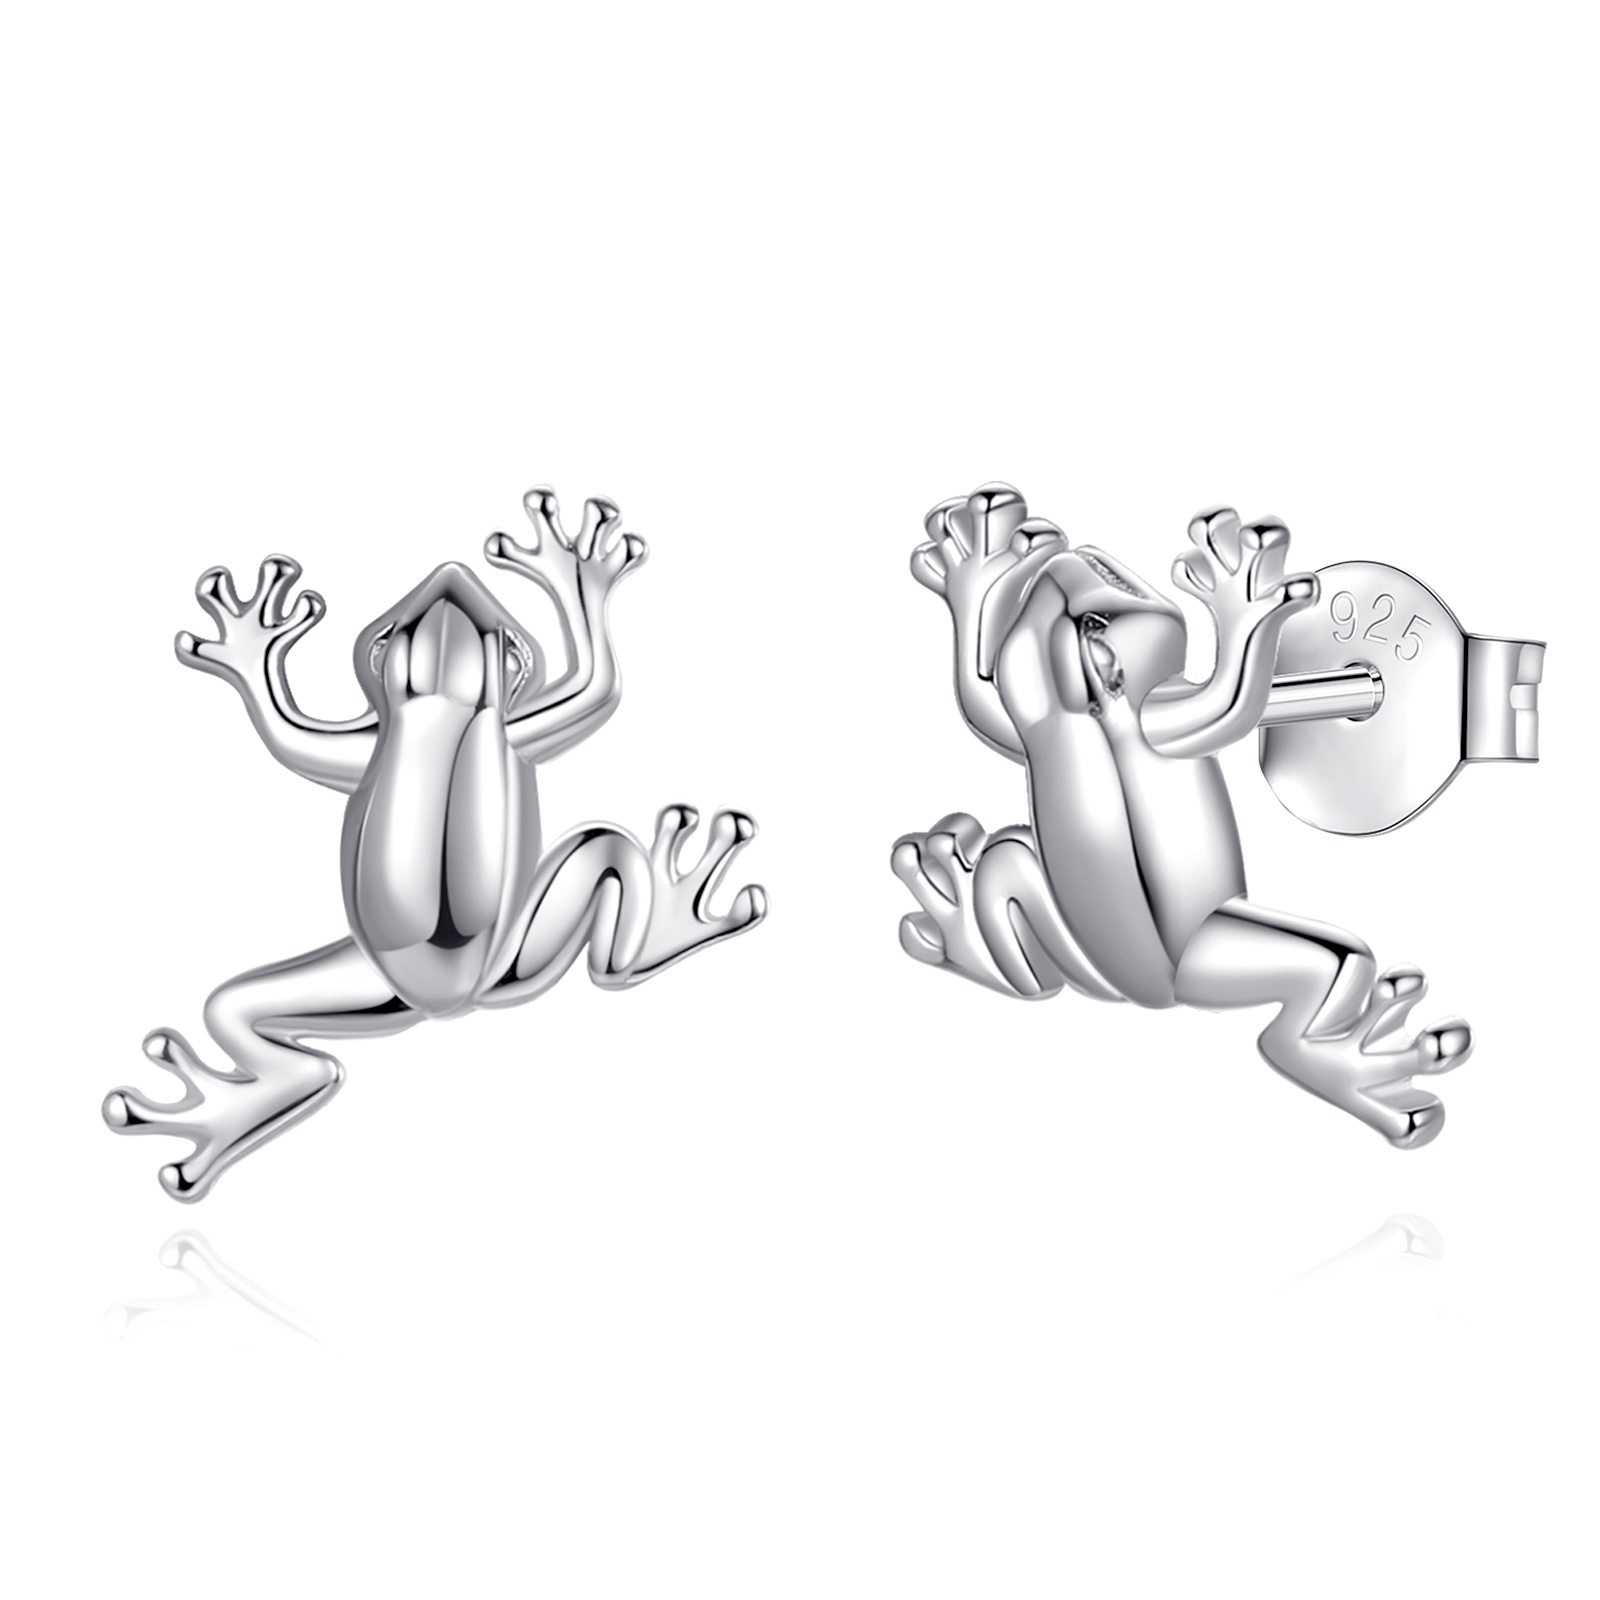 Merryshine Fashion Jewelry 925 Sterling Silver Rhodium Plated Unique Frog Design Stud Earrings